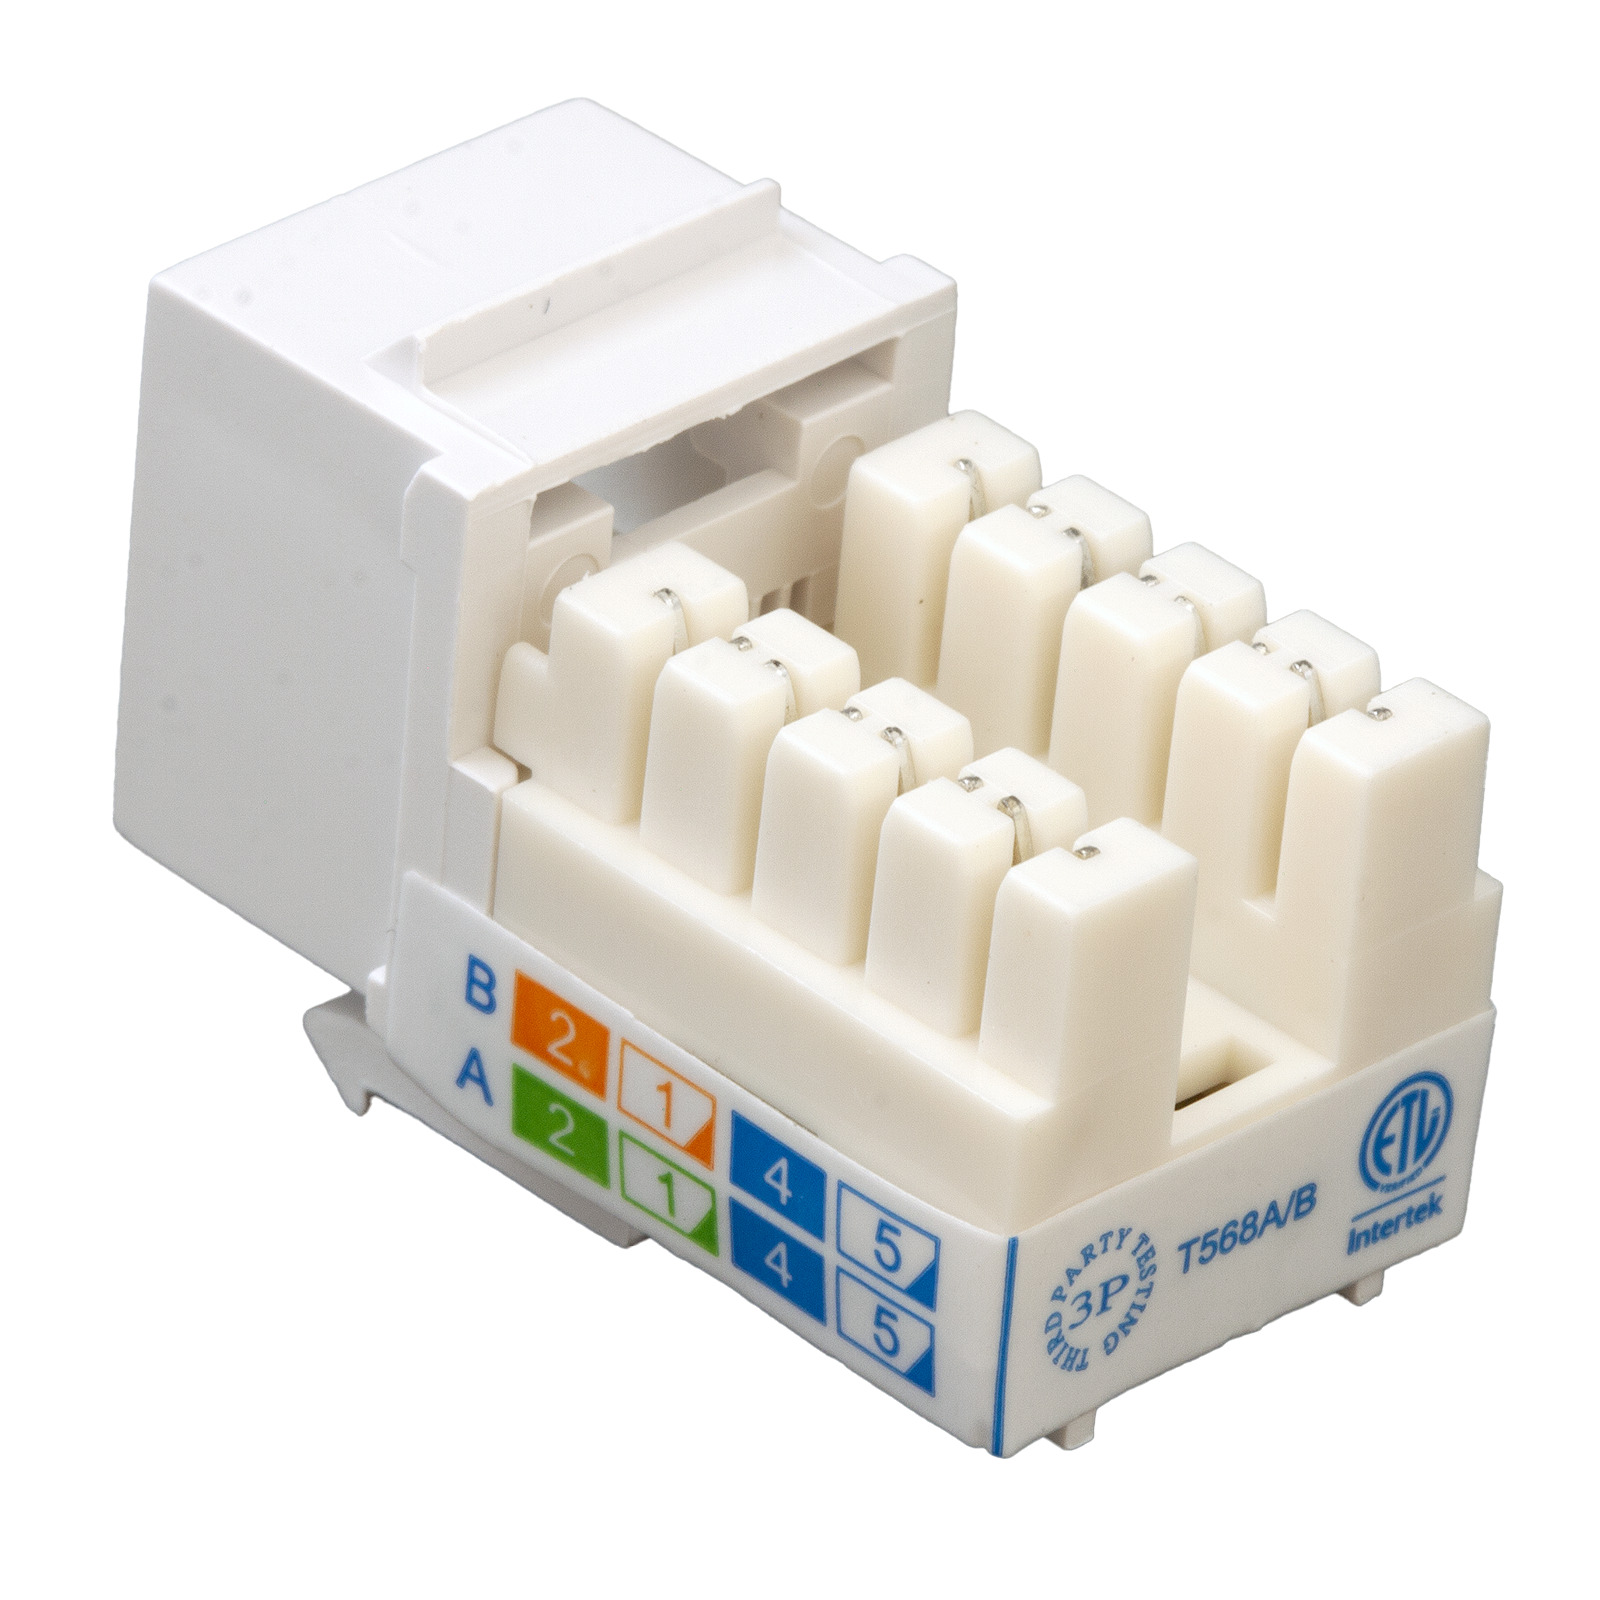 Ethernet Cat6 Jack White Available UL Listed Cat6 - 25 Pack 